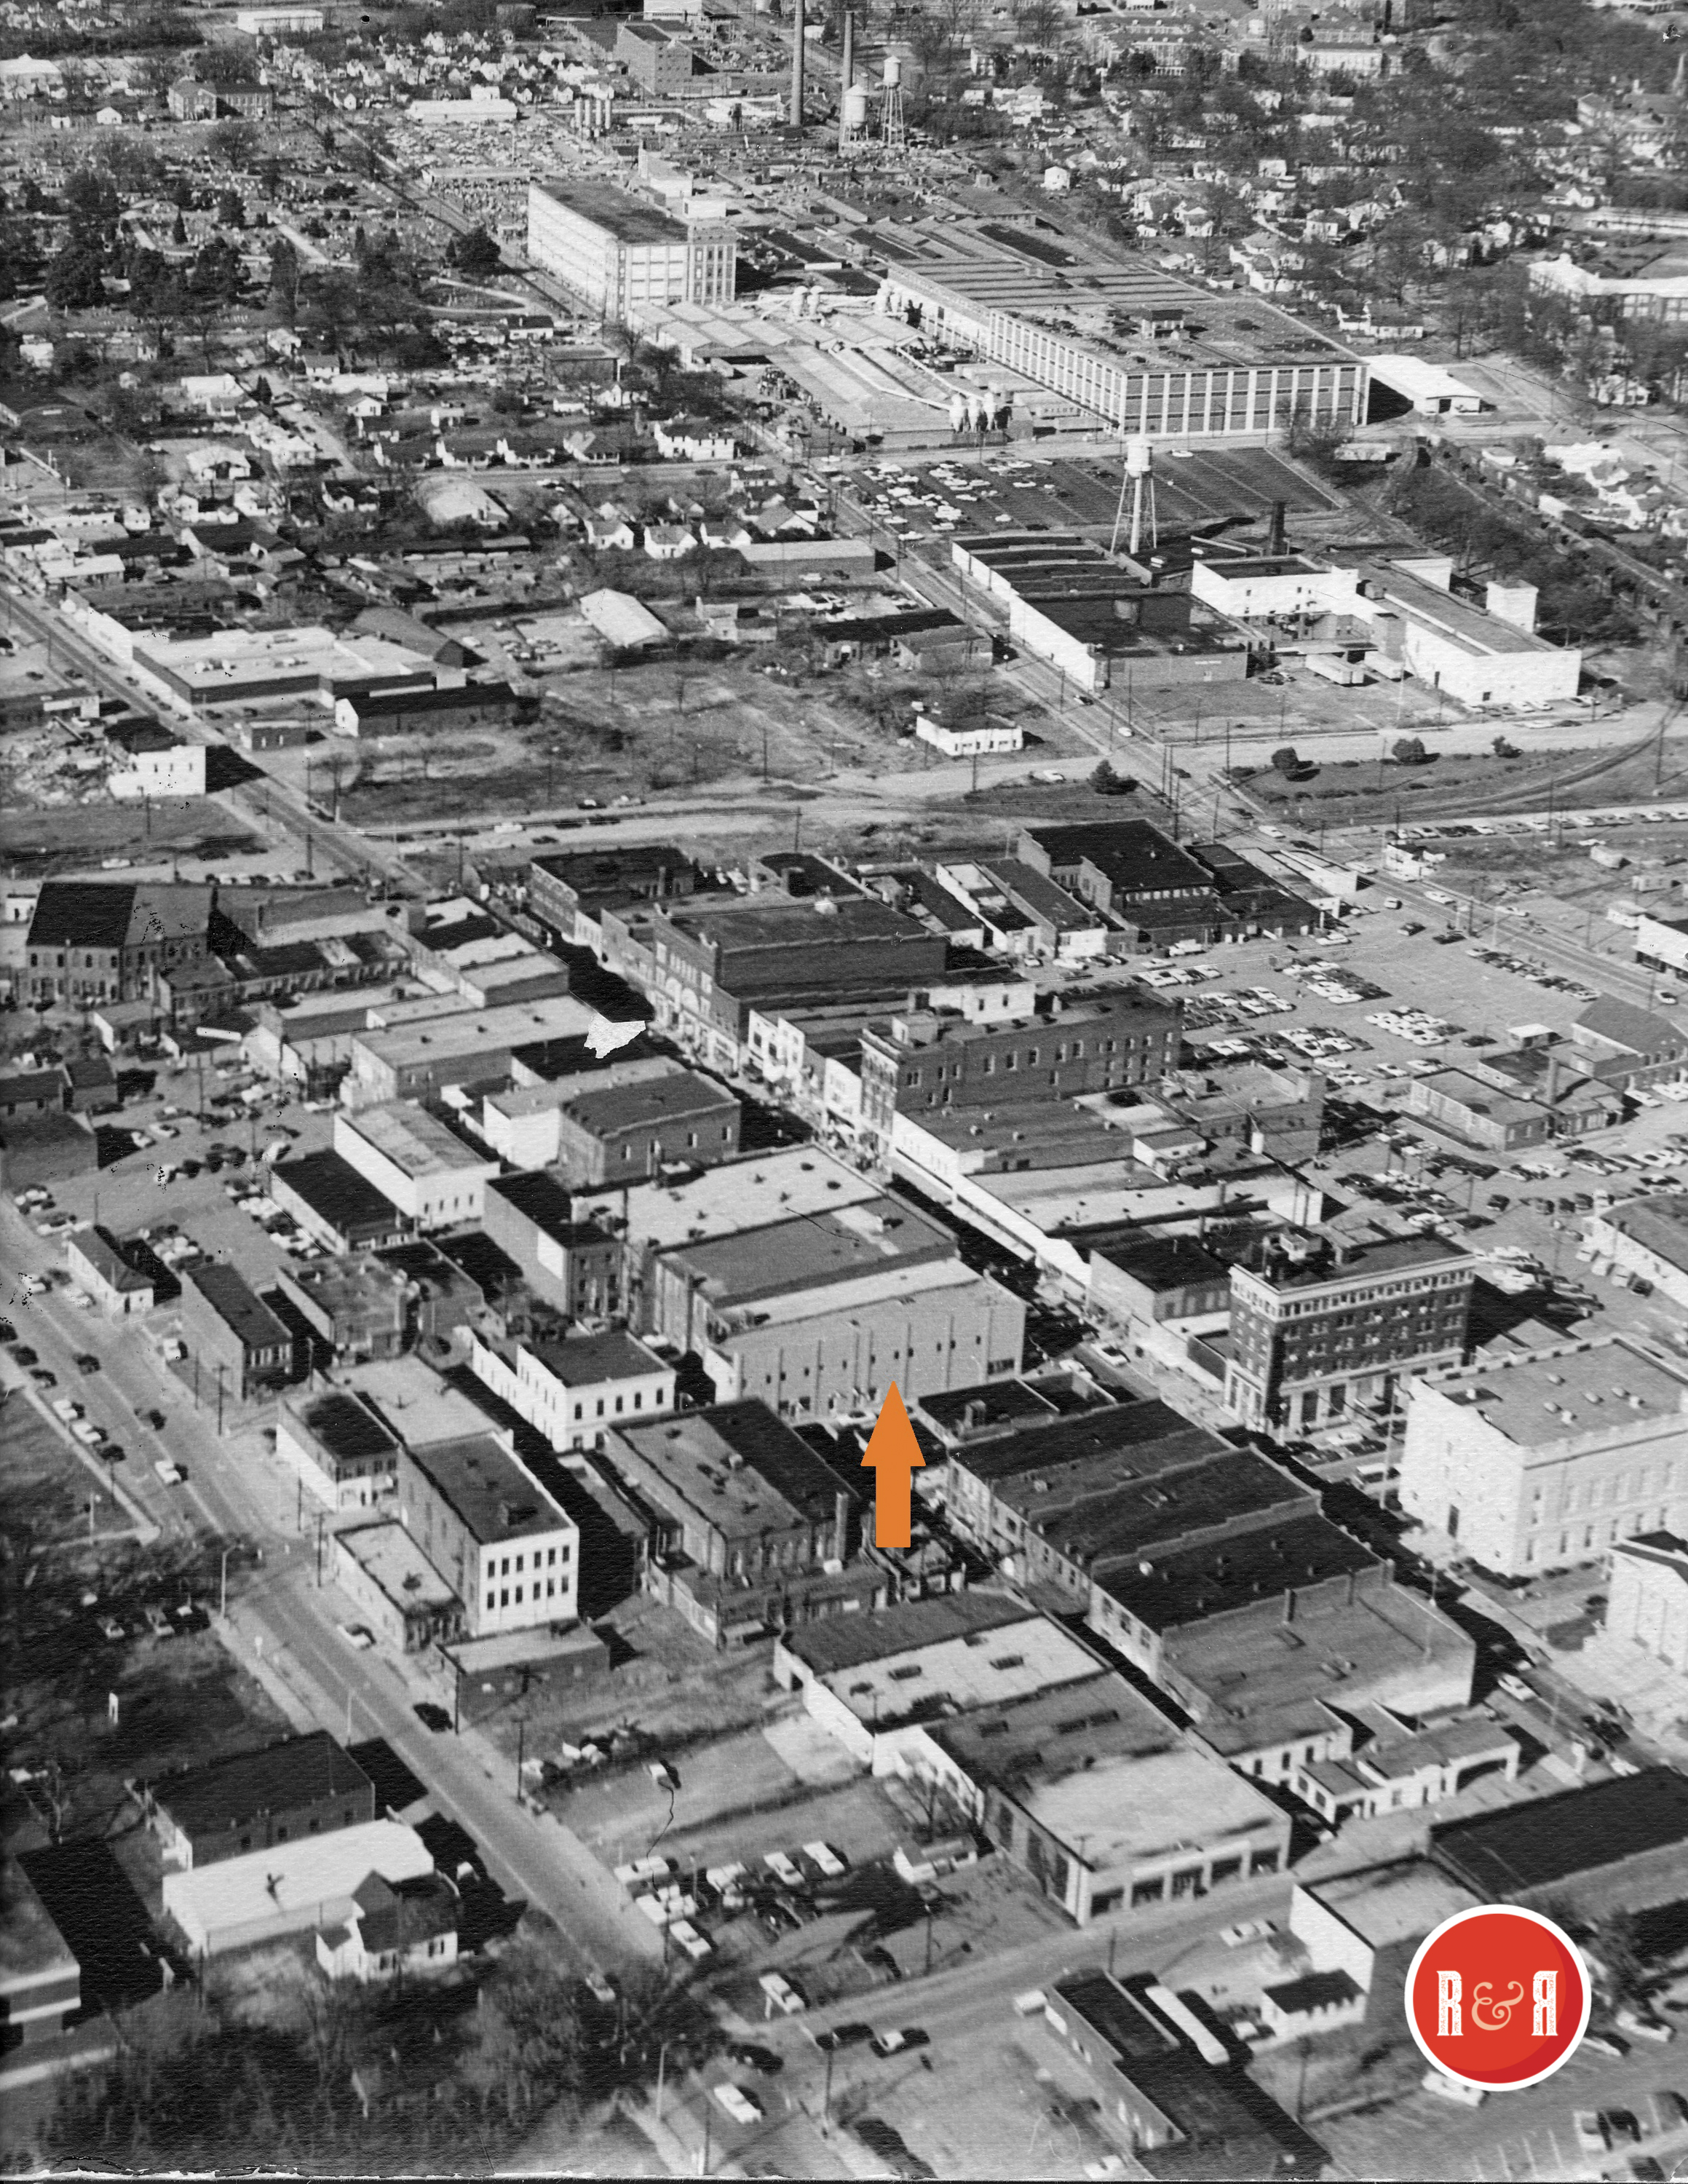 AERIAL VIEW OF DOWNTOWN ROCK HILL SHOWING THE LOCATION